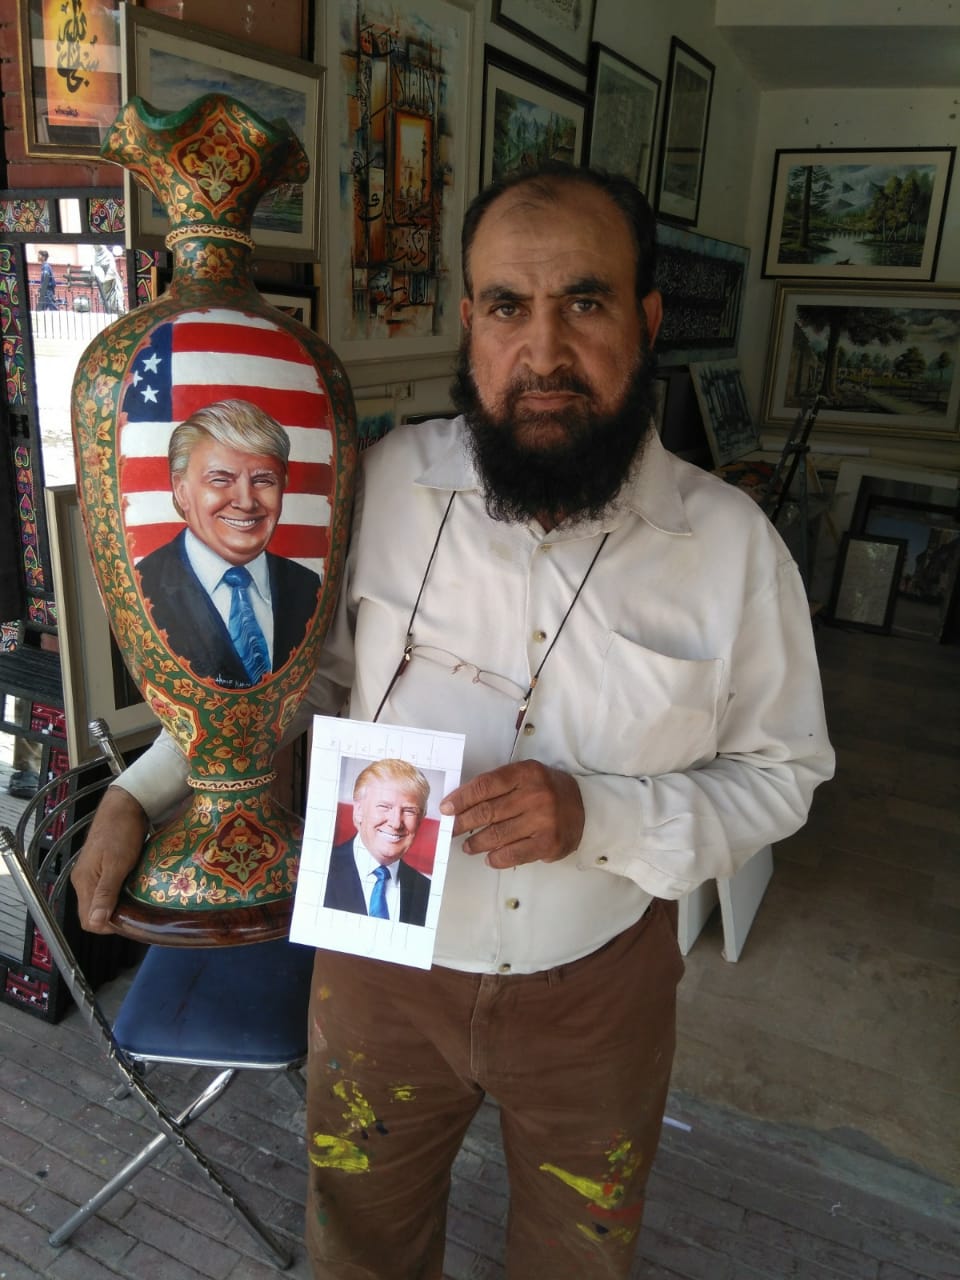 illustrating trump 039 s hairstyle was more difficult than painting his face on a small vase says artist hanifullah photo express